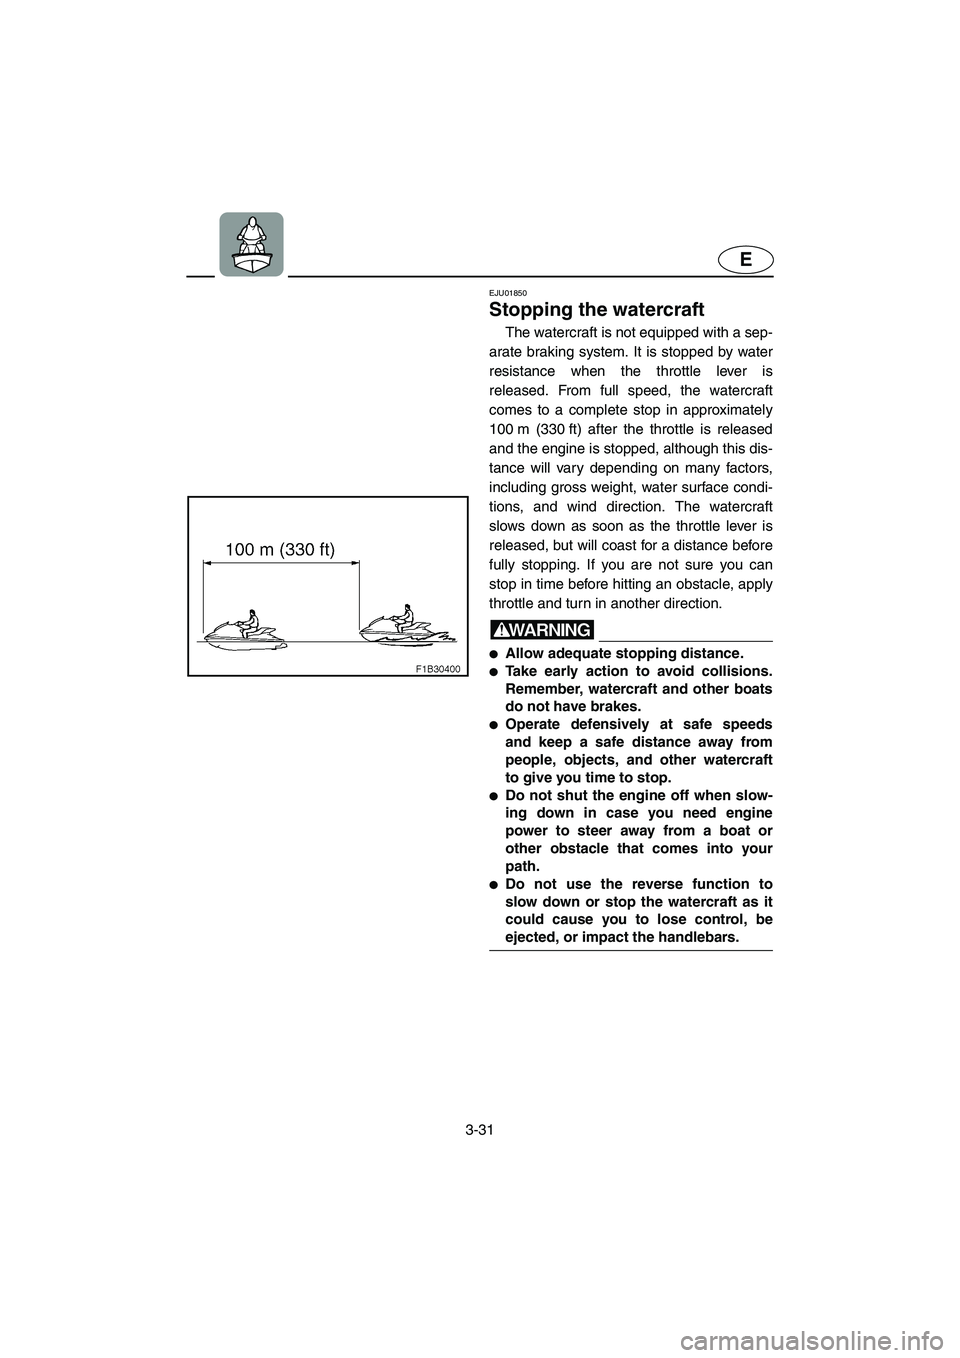 YAMAHA FX 2003  Owners Manual 3-31
E
EJU01850
Stopping the watercraft 
The watercraft is not equipped with a sep-
arate braking system. It is stopped by water
resistance when the throttle lever is
released. From full speed, the wa